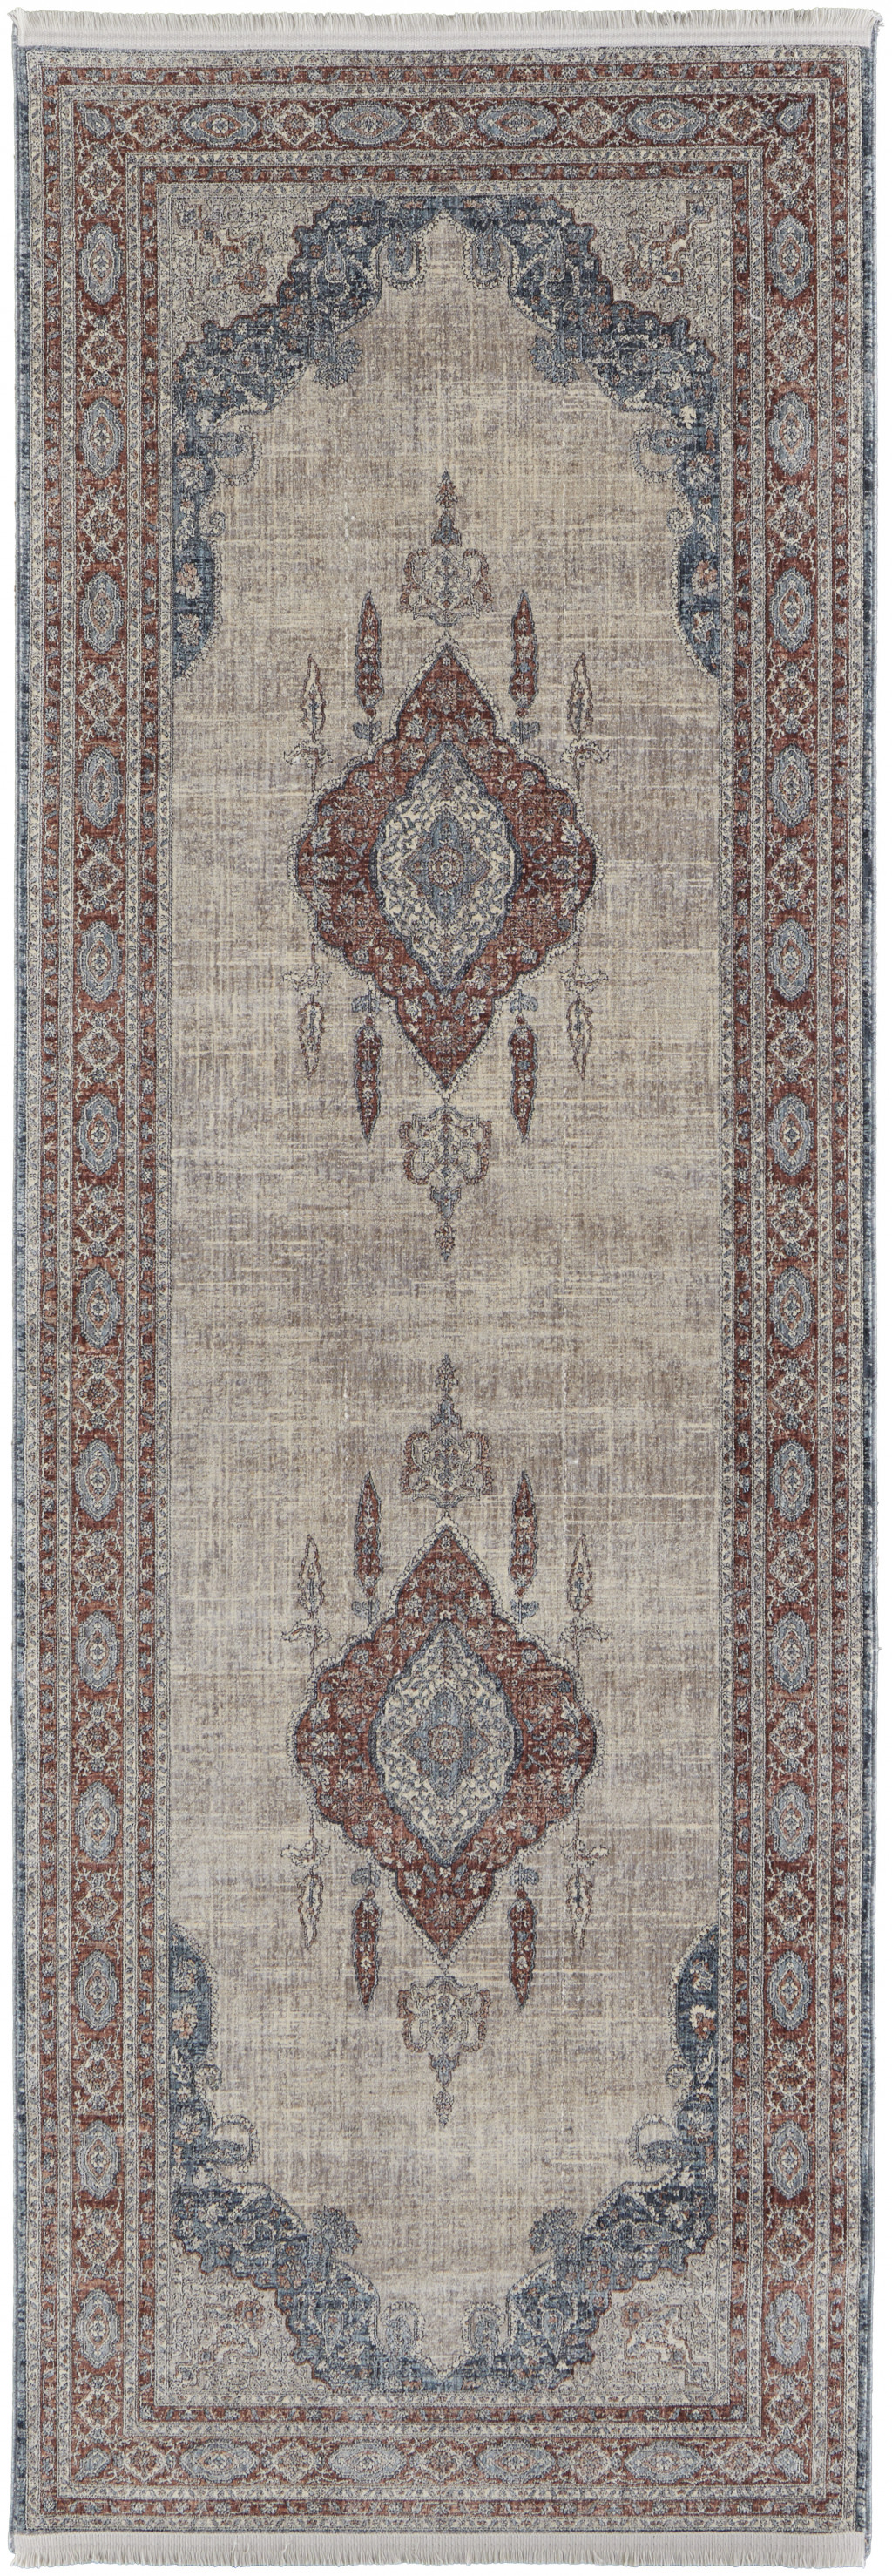 10' Gray Red And Blue Floral Power Loom Stain Resistant Runner Rug-514461-1